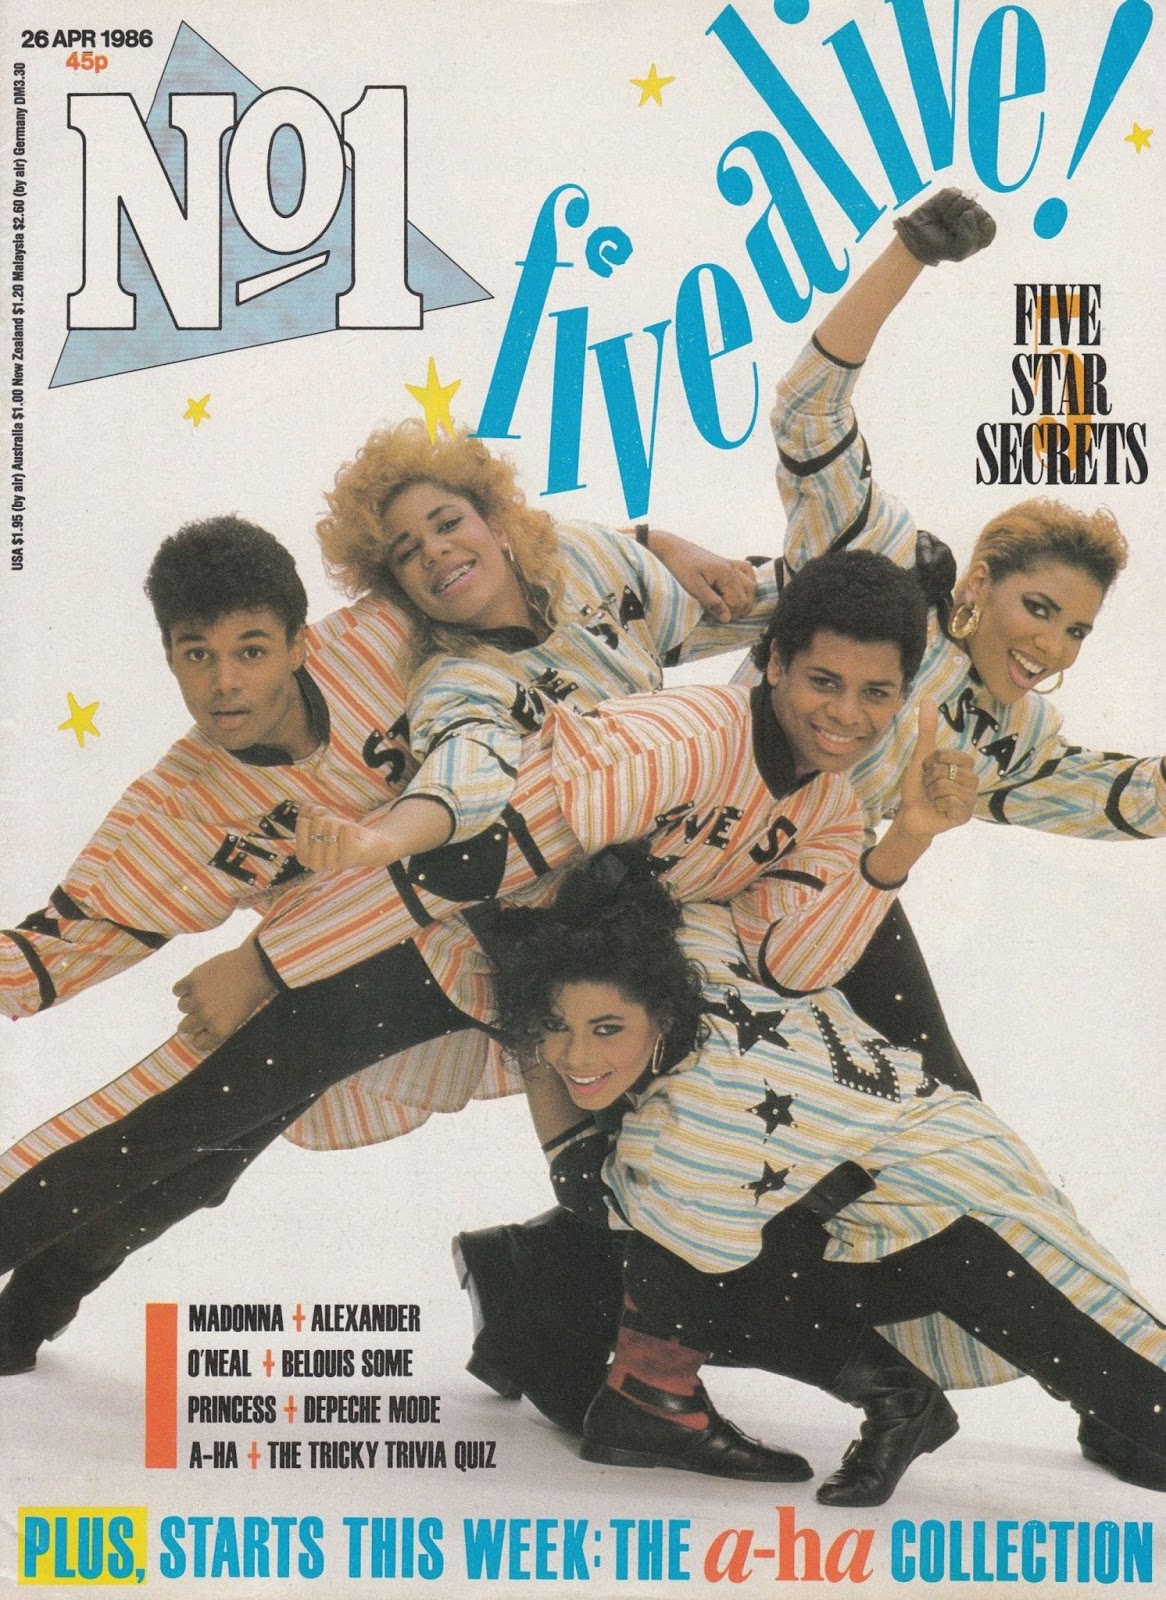 Top Of The Pop Culture 80s: Five Number 1 Magazine 1986